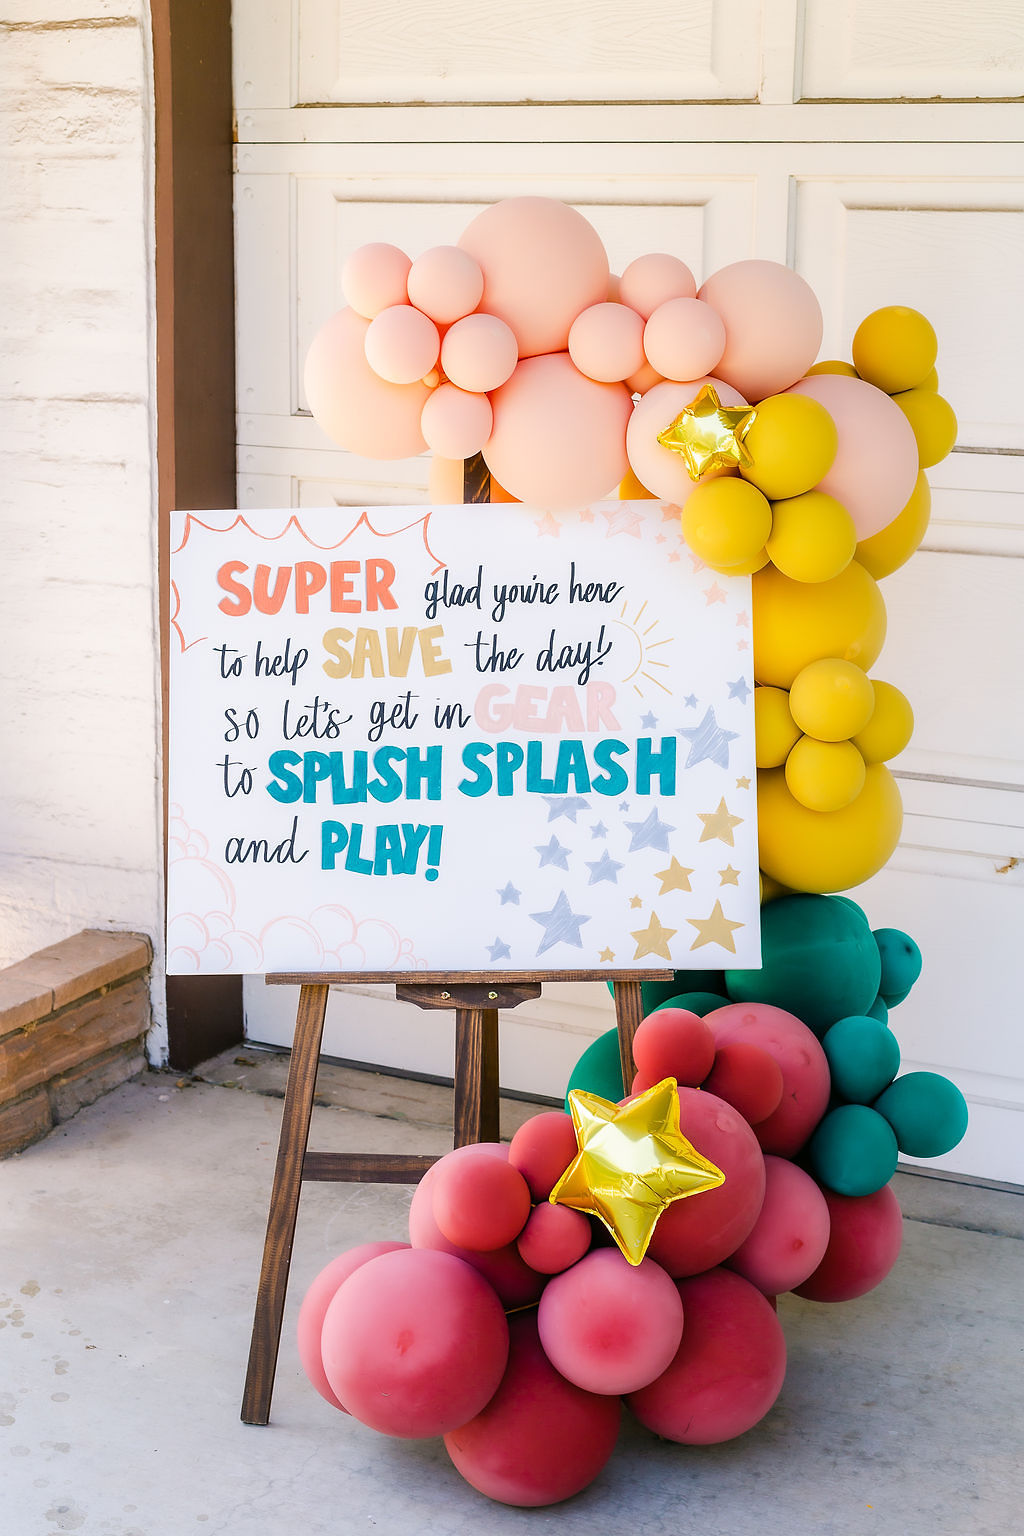 Superhero themed joint brother-sister birthday party